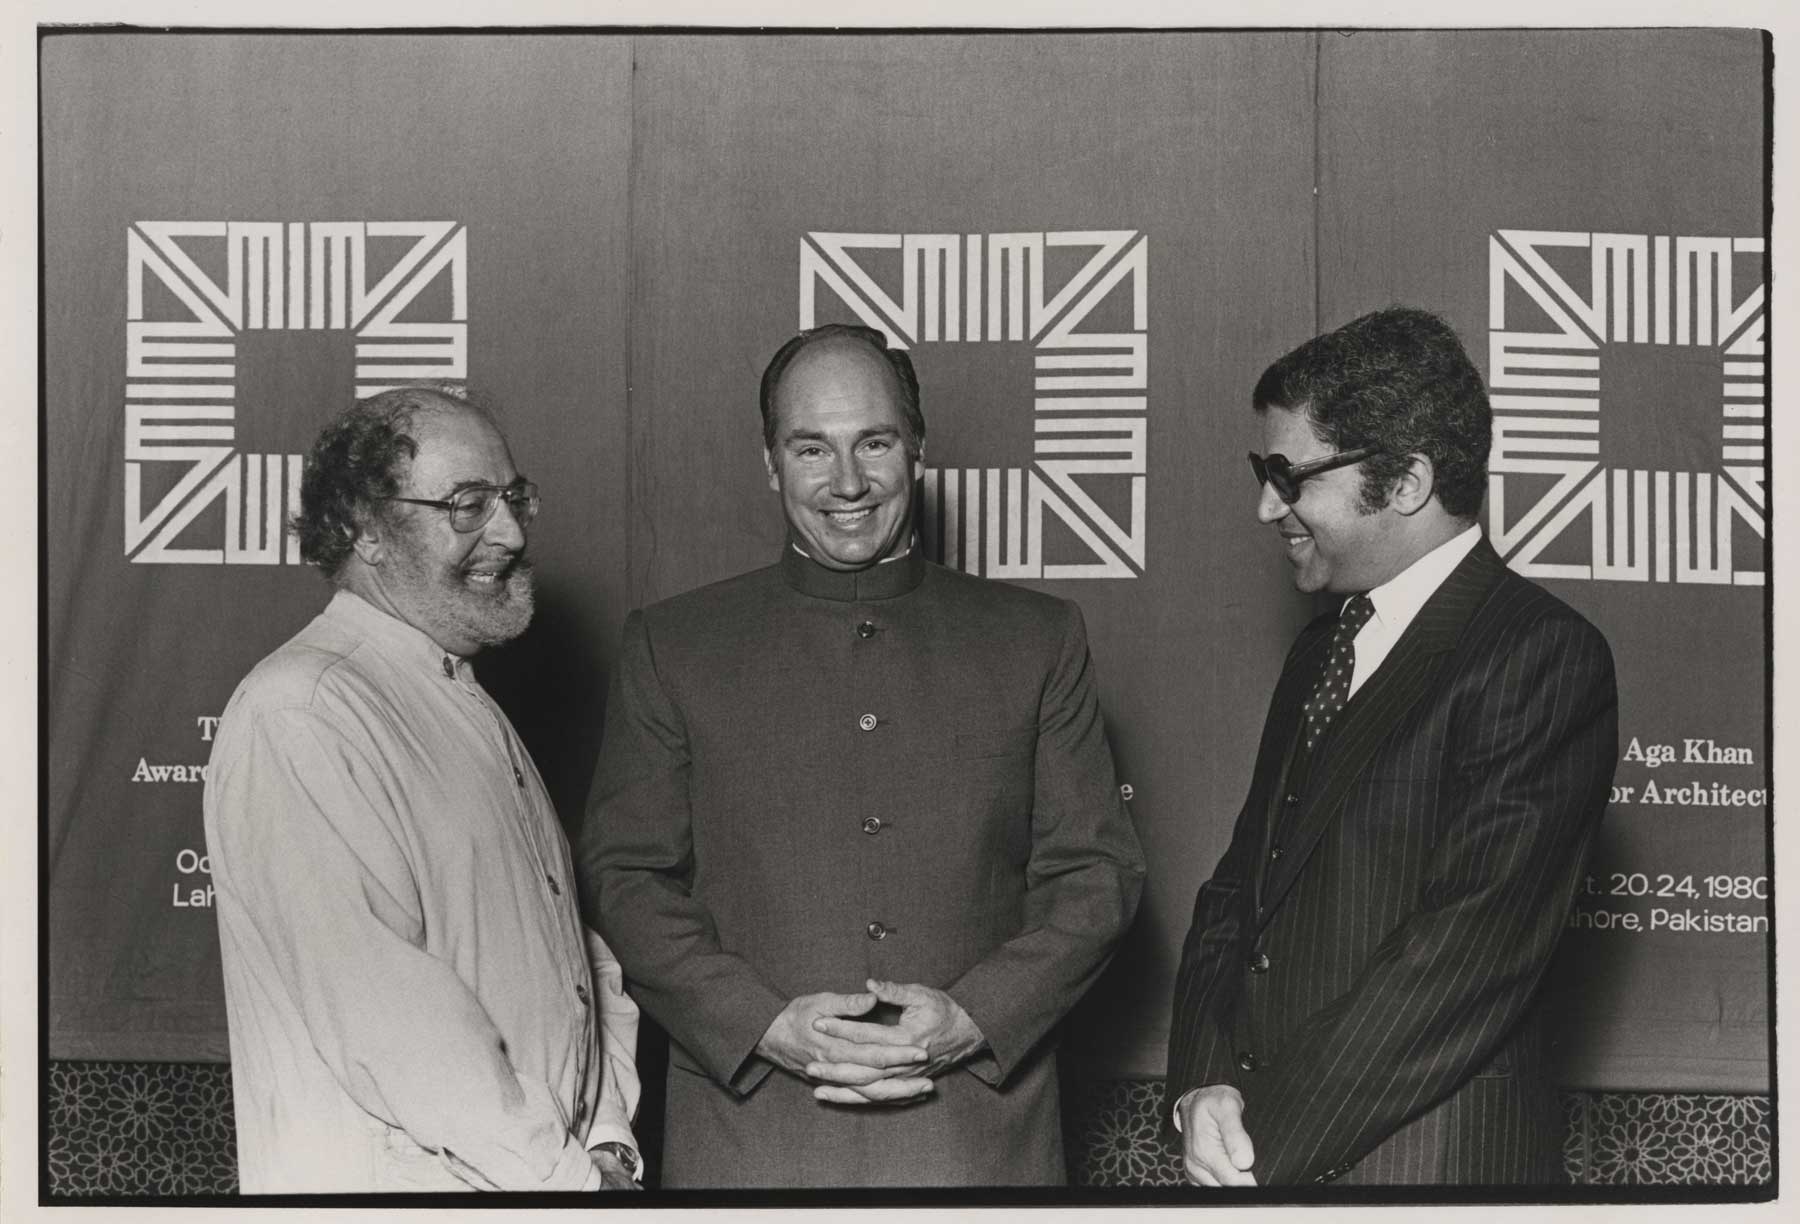 <p>Jean-Francois Zevaco (left), H.H. Aga Khan (center) and a Moroccan official at the 1980 ceremony of the Aga Khan Award for Architecture</p>